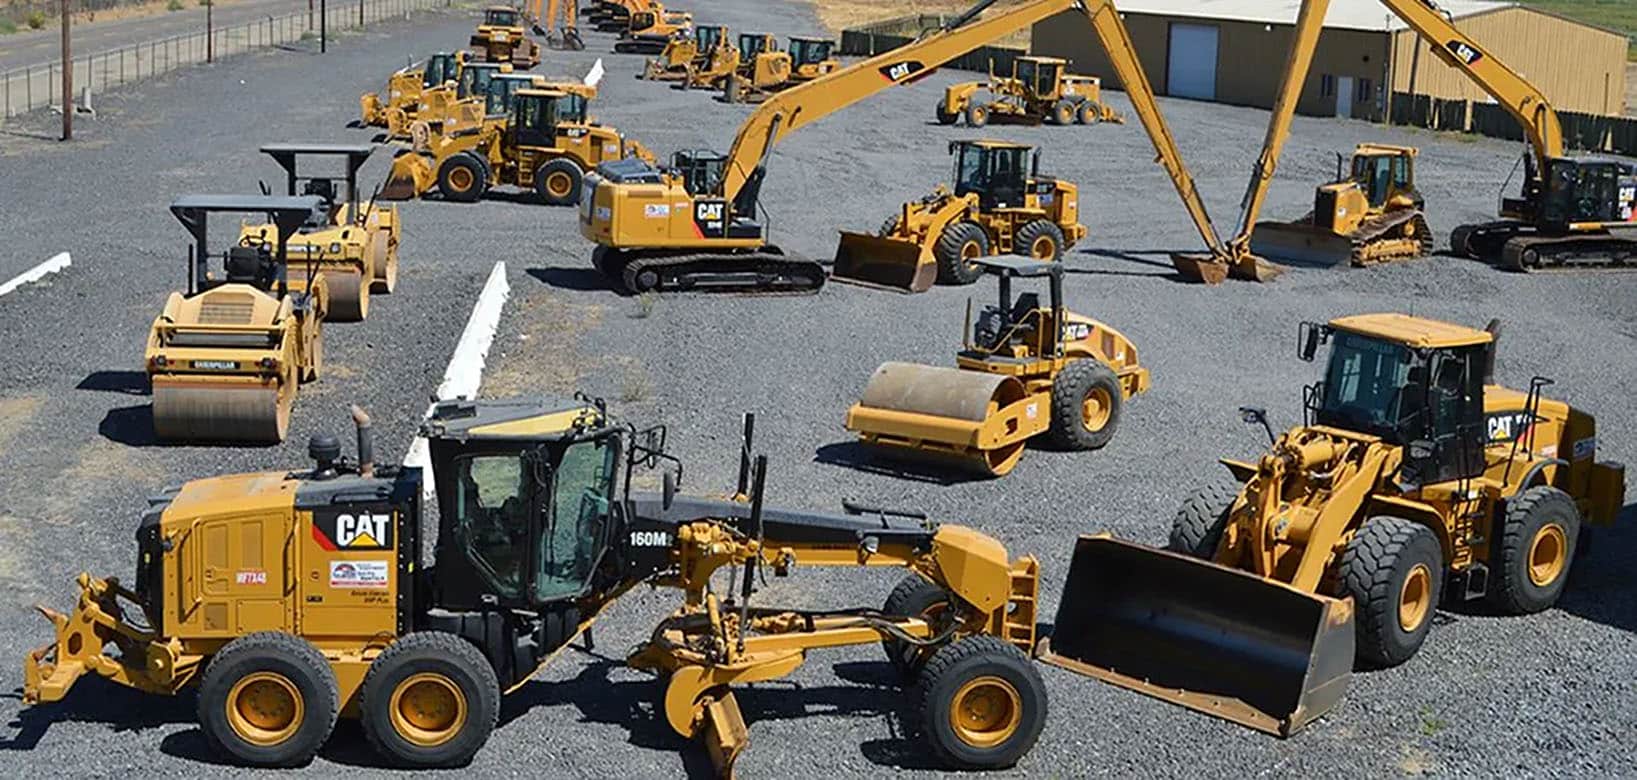 Heavy Equipment Yard Security and Video